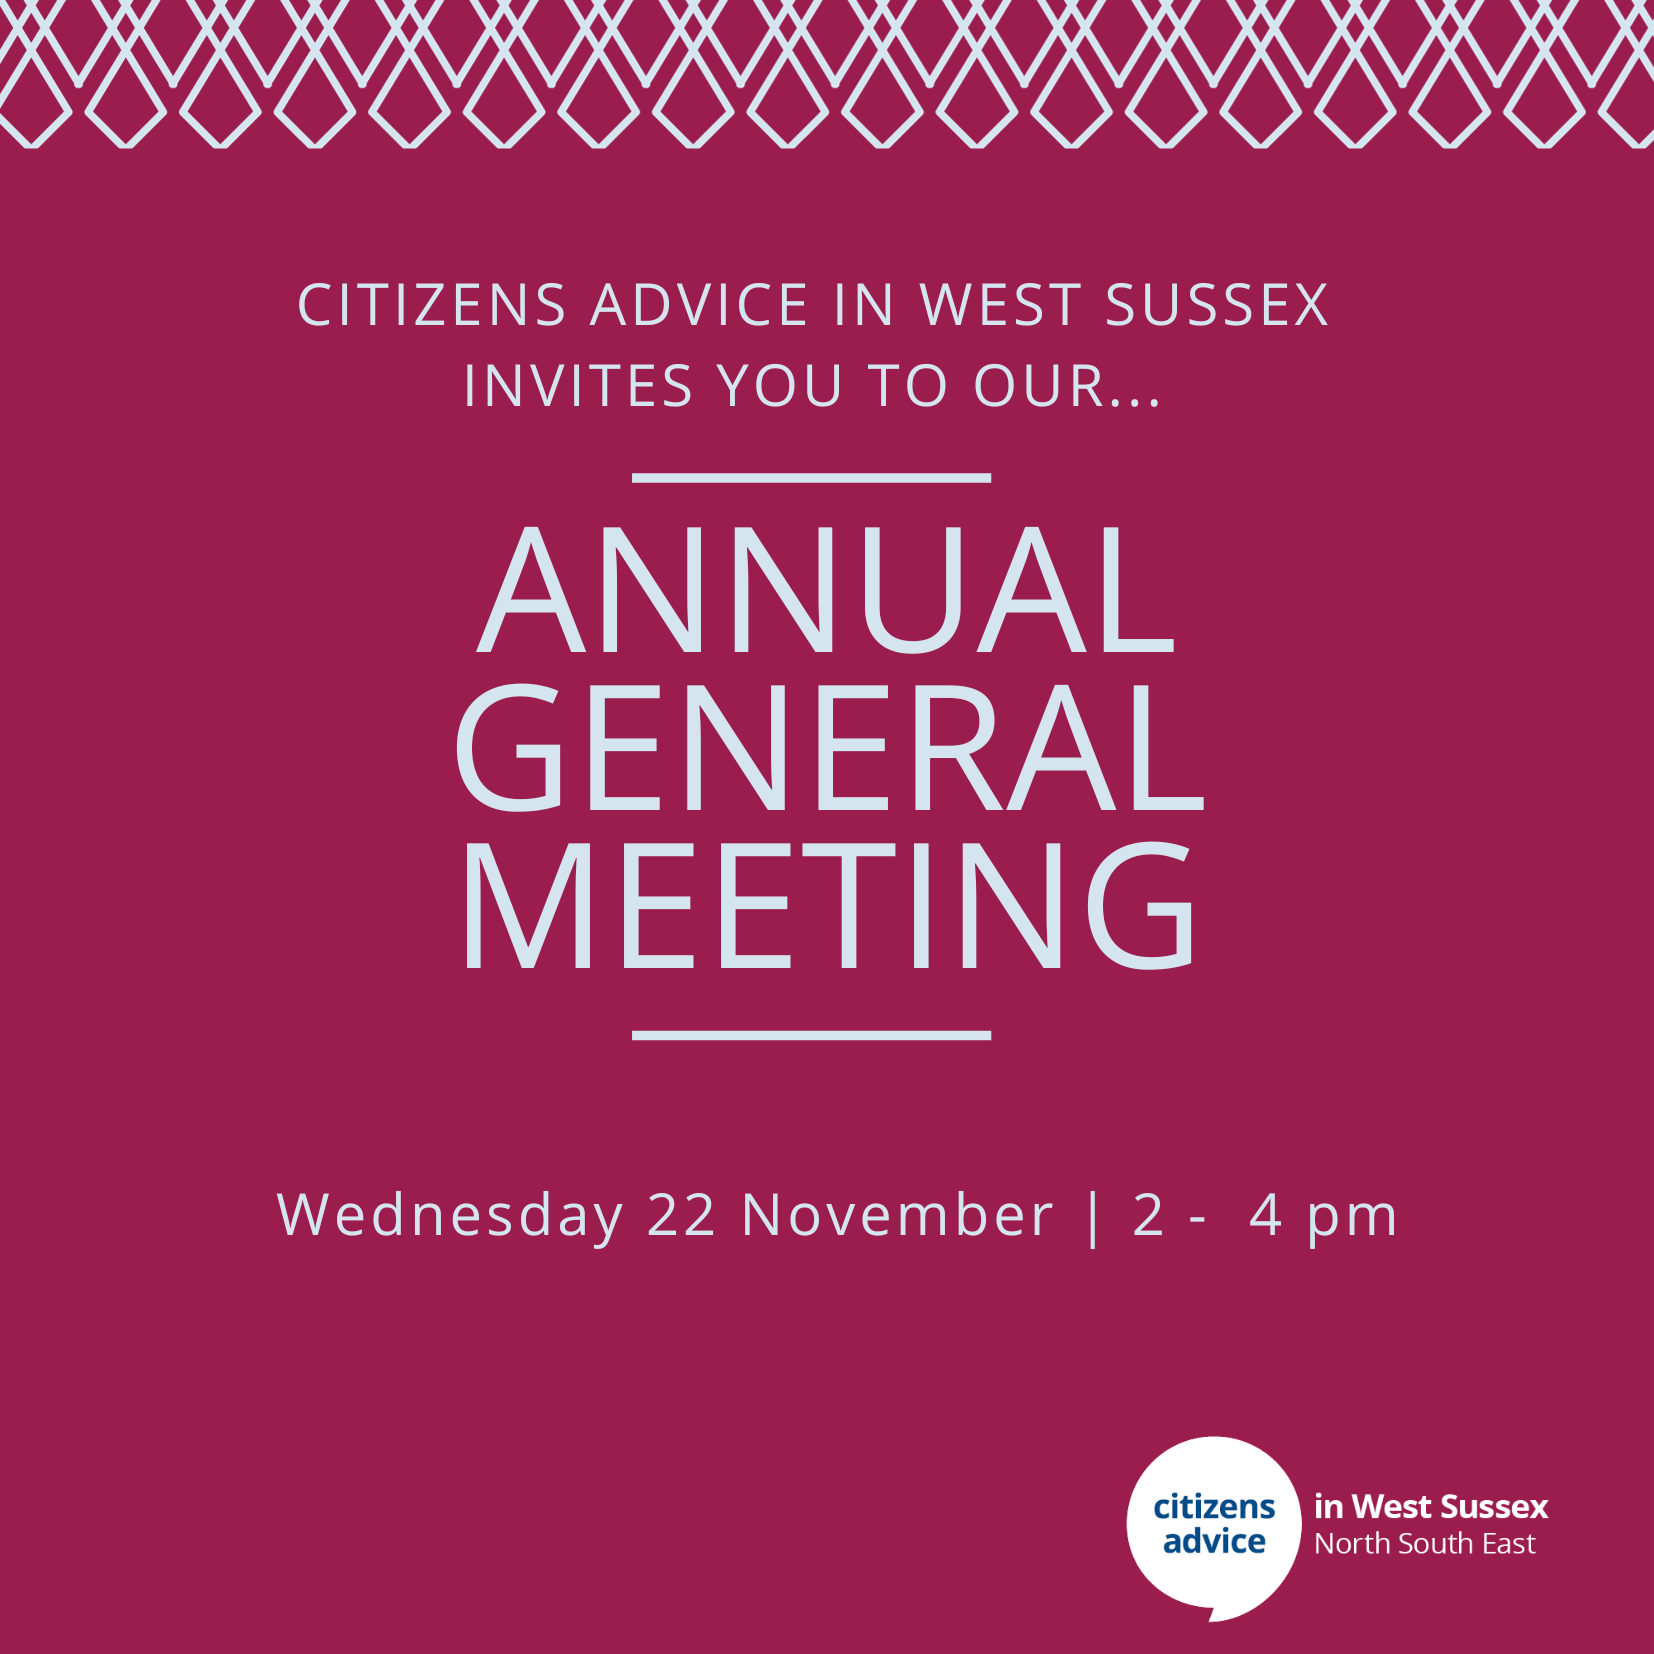 Our Annual General Meeting